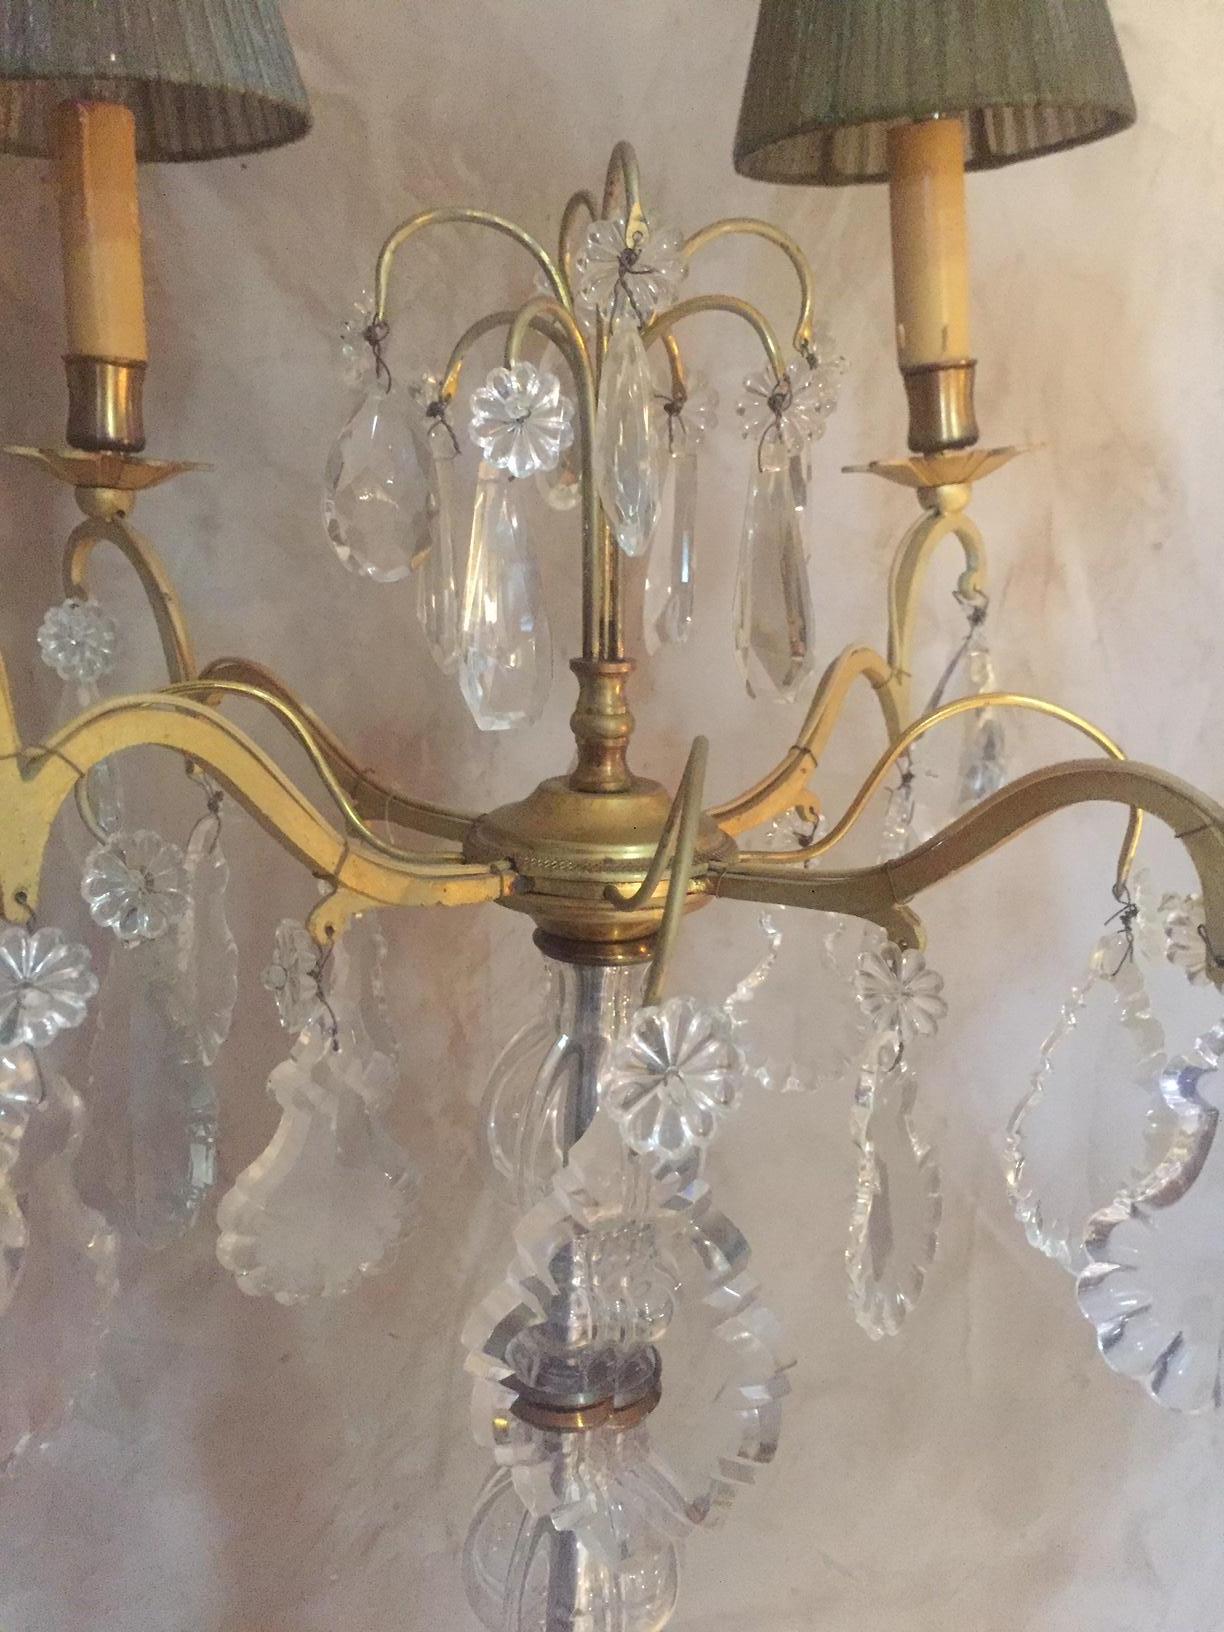 Very nice 20th century, French gilded brass and glass floor lamp from the 1950s, with beautiful pendants. Electric dimmer.
Four lampshades.